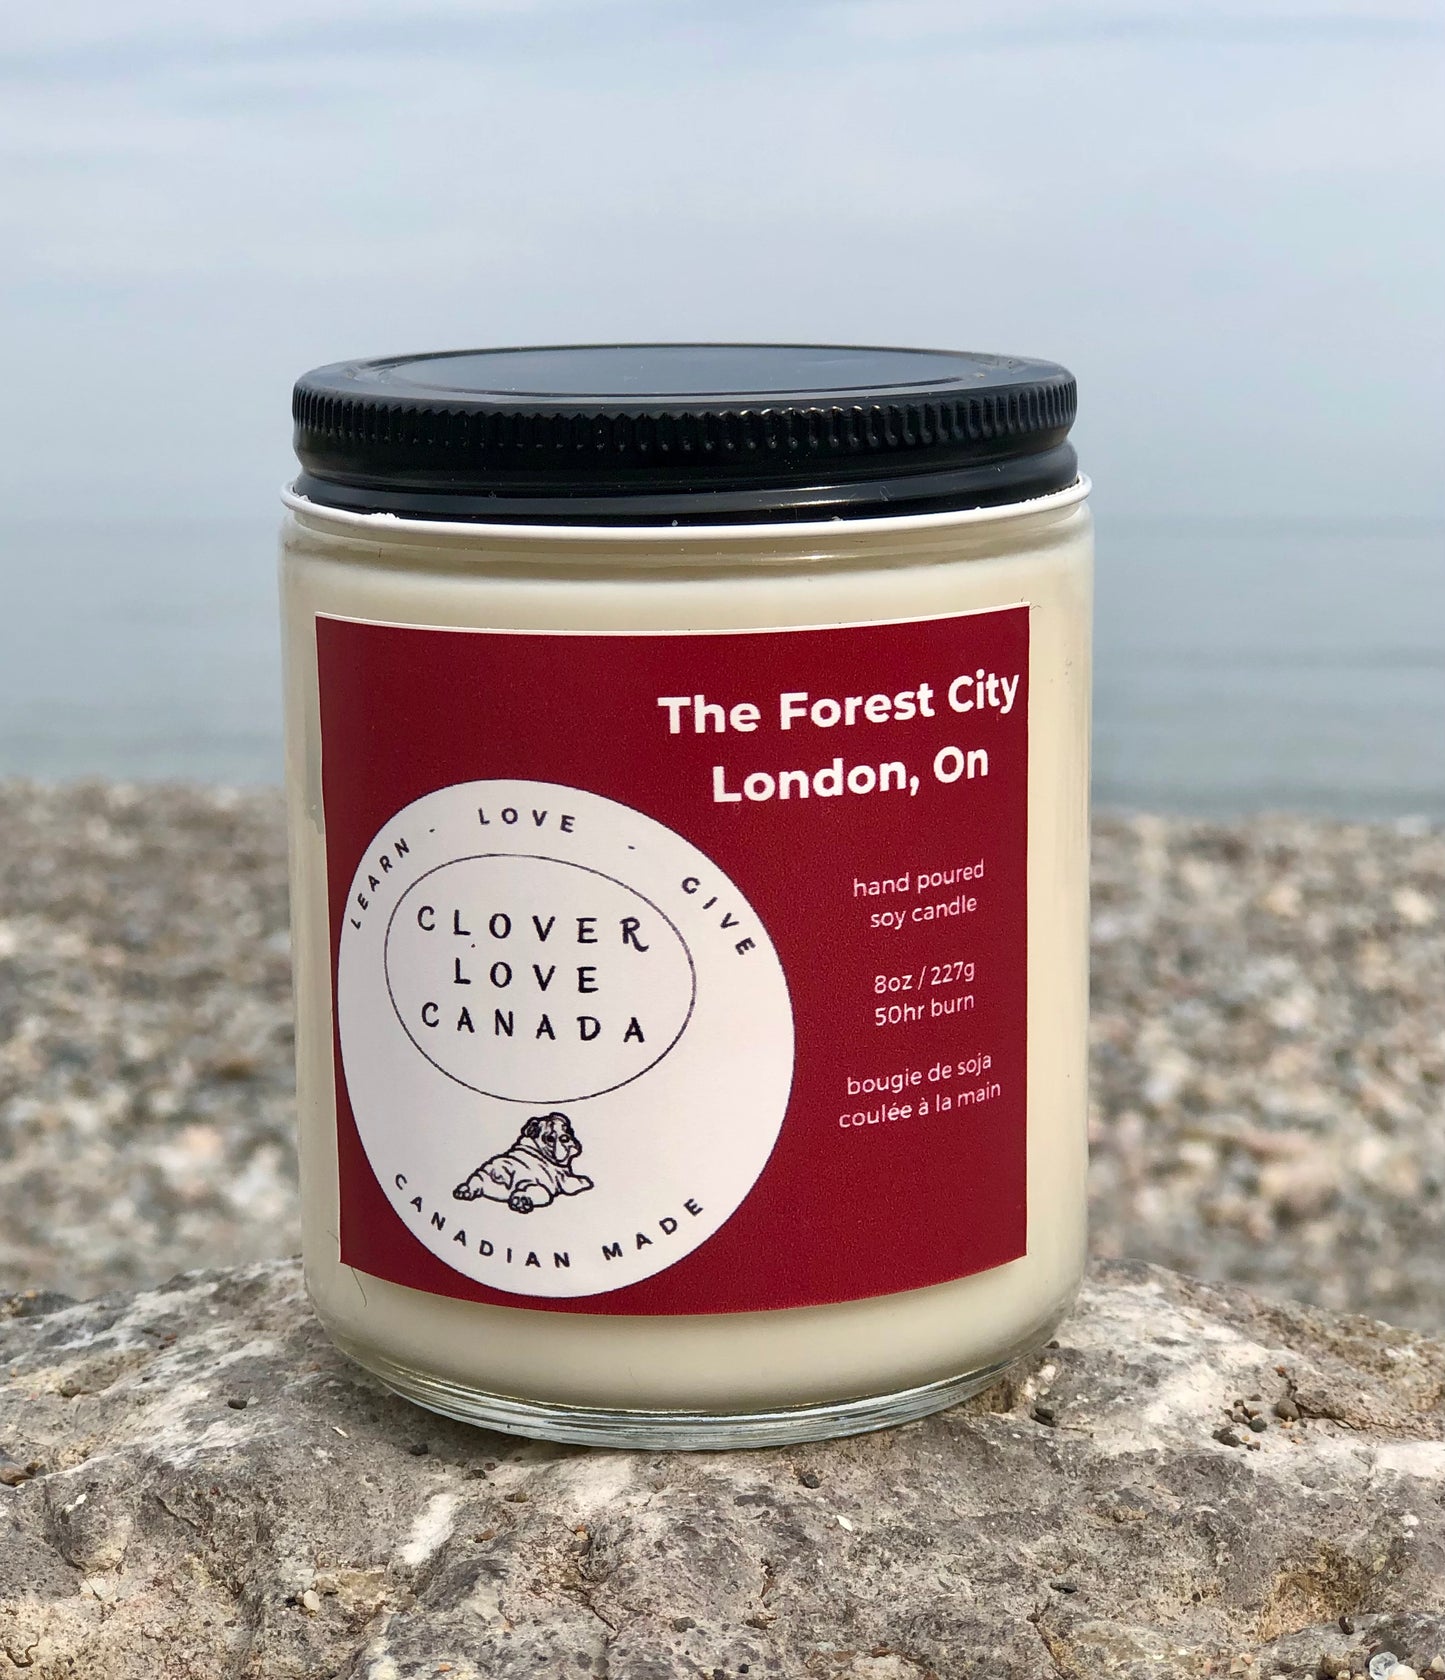 8 oz candle with red label The Forest City London  On